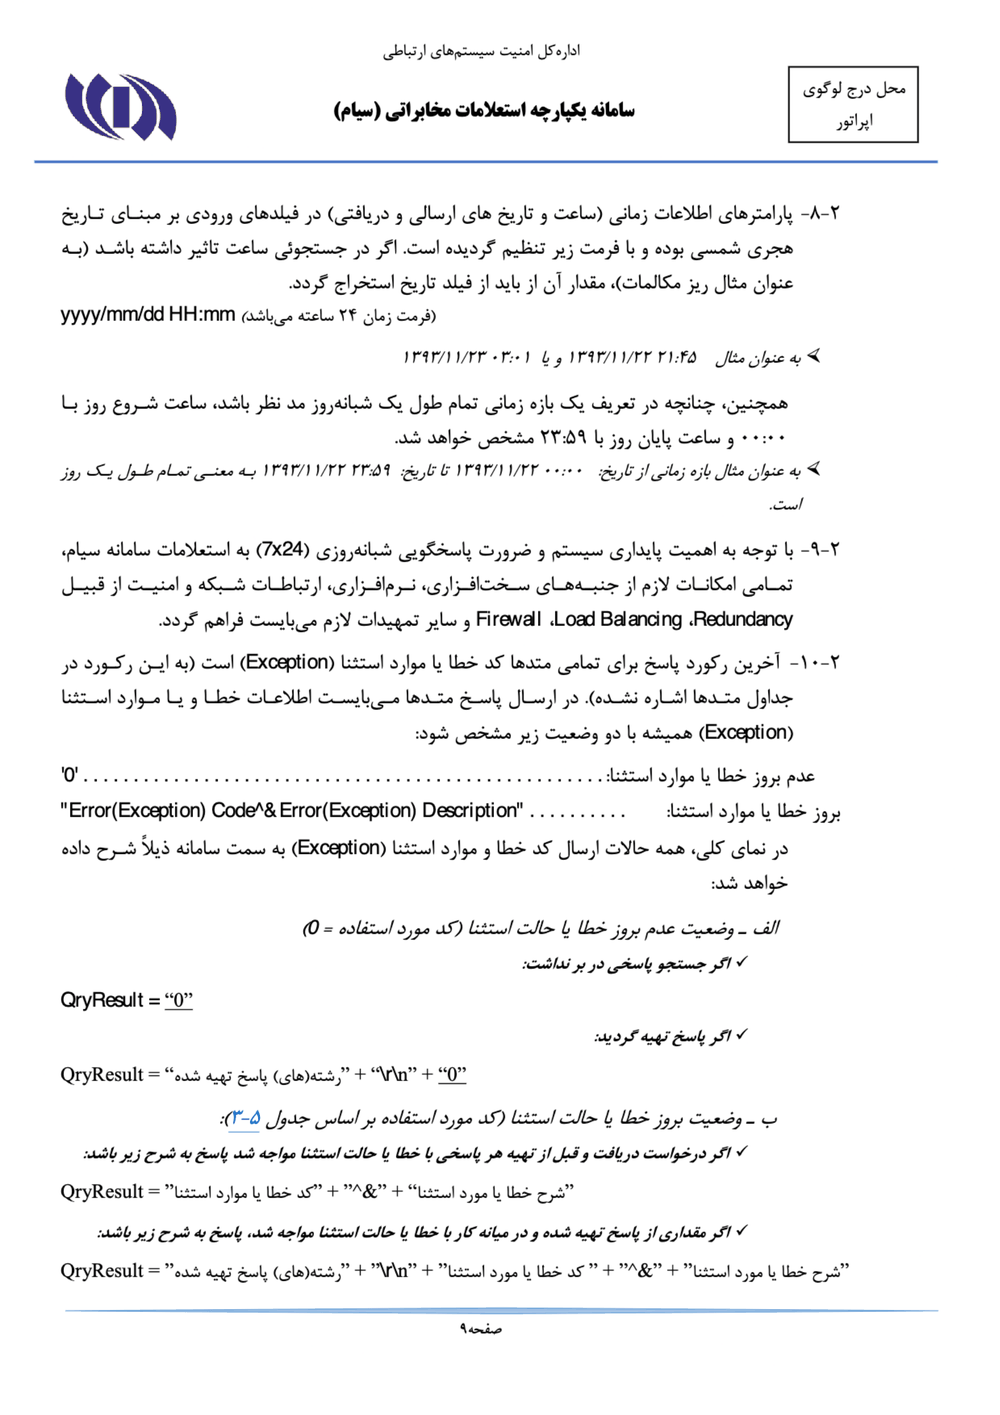 Page 9 from Iran’s SIAM Manual in Persian for Tracking and Controlling Mobile Phones